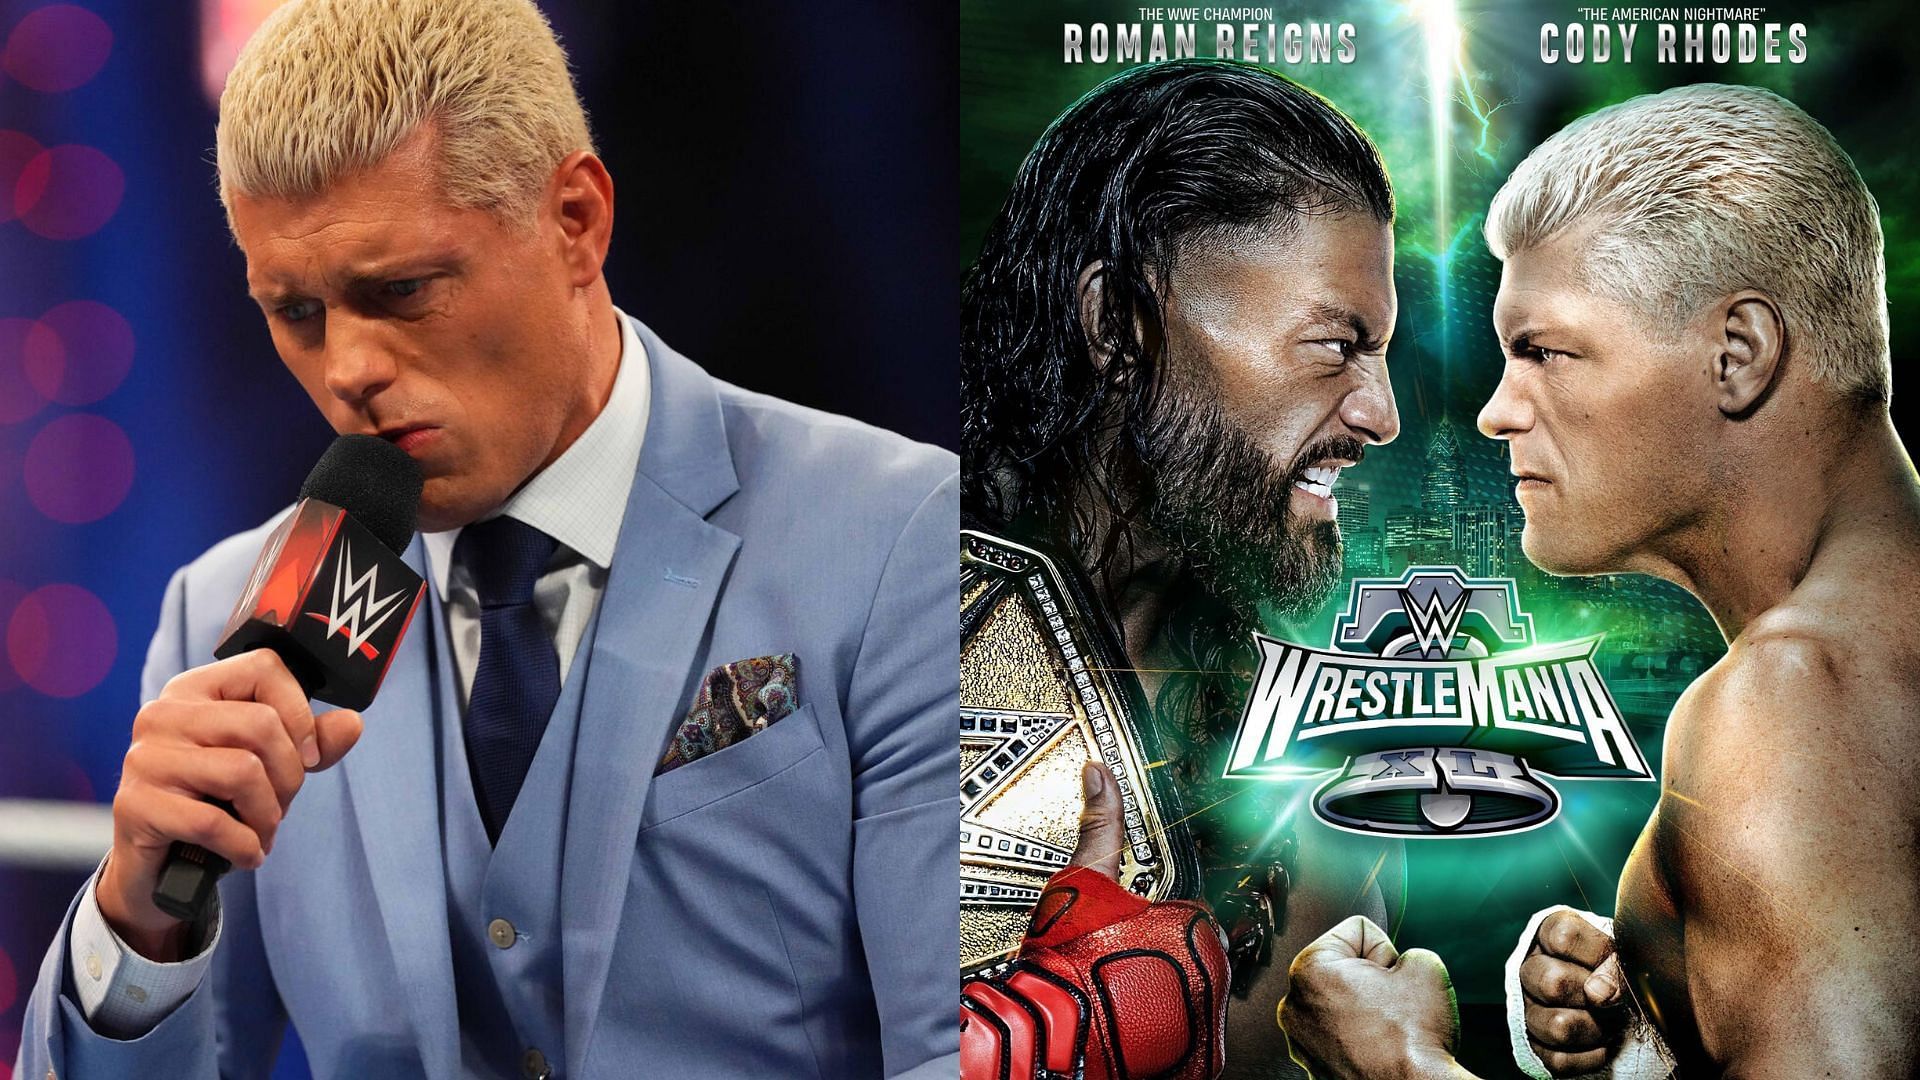 Roman Reigns and Cody Rhodes will compete on both nights of WrestleMania XL!